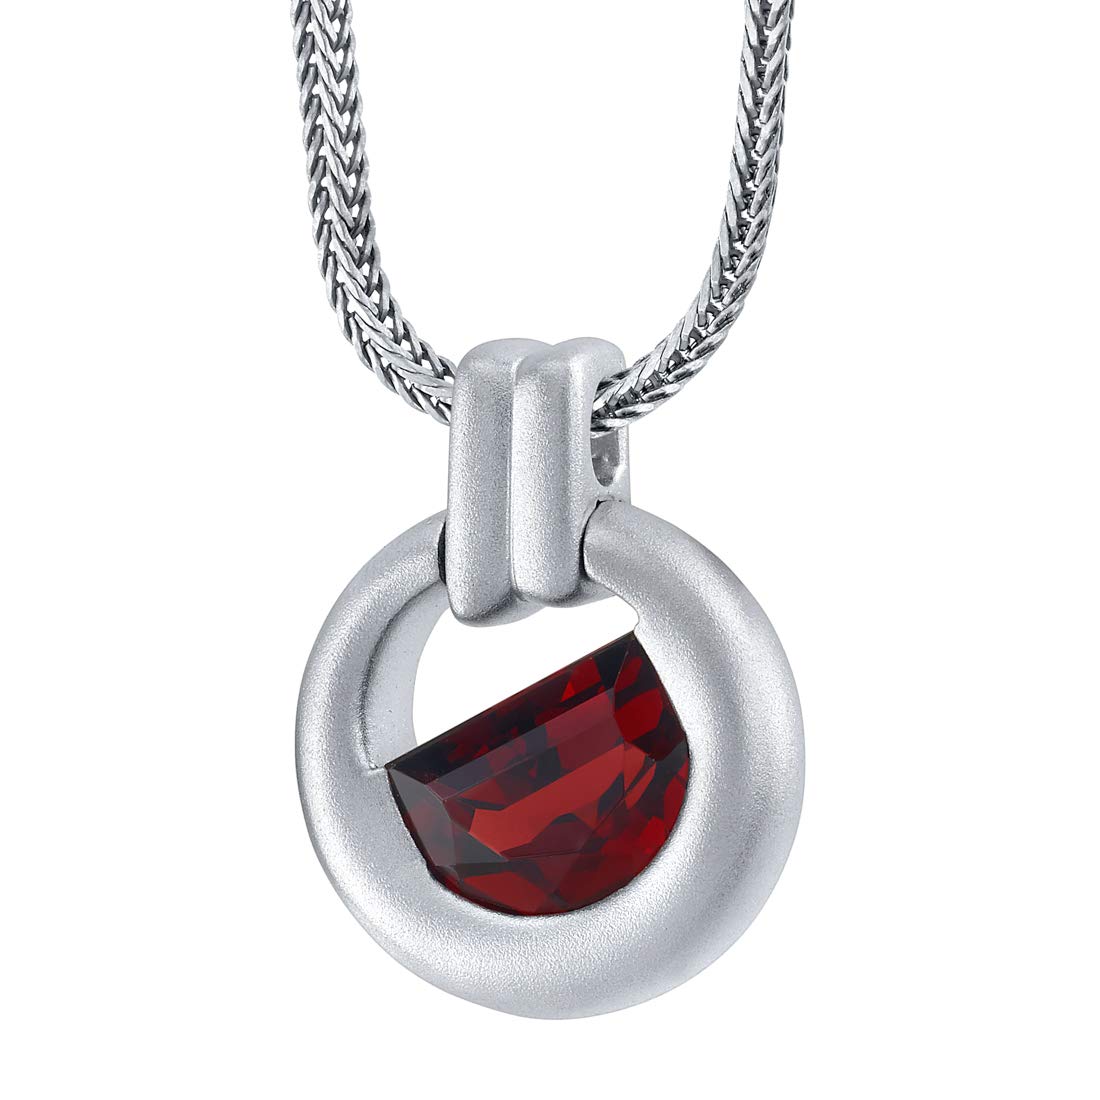 Peora Garnet Amulet Pendant Necklace for Men in Sterling Silver, 4.50 Carats Half Moon Shape, Brushed Finished, with 22-Inch Italian Chain